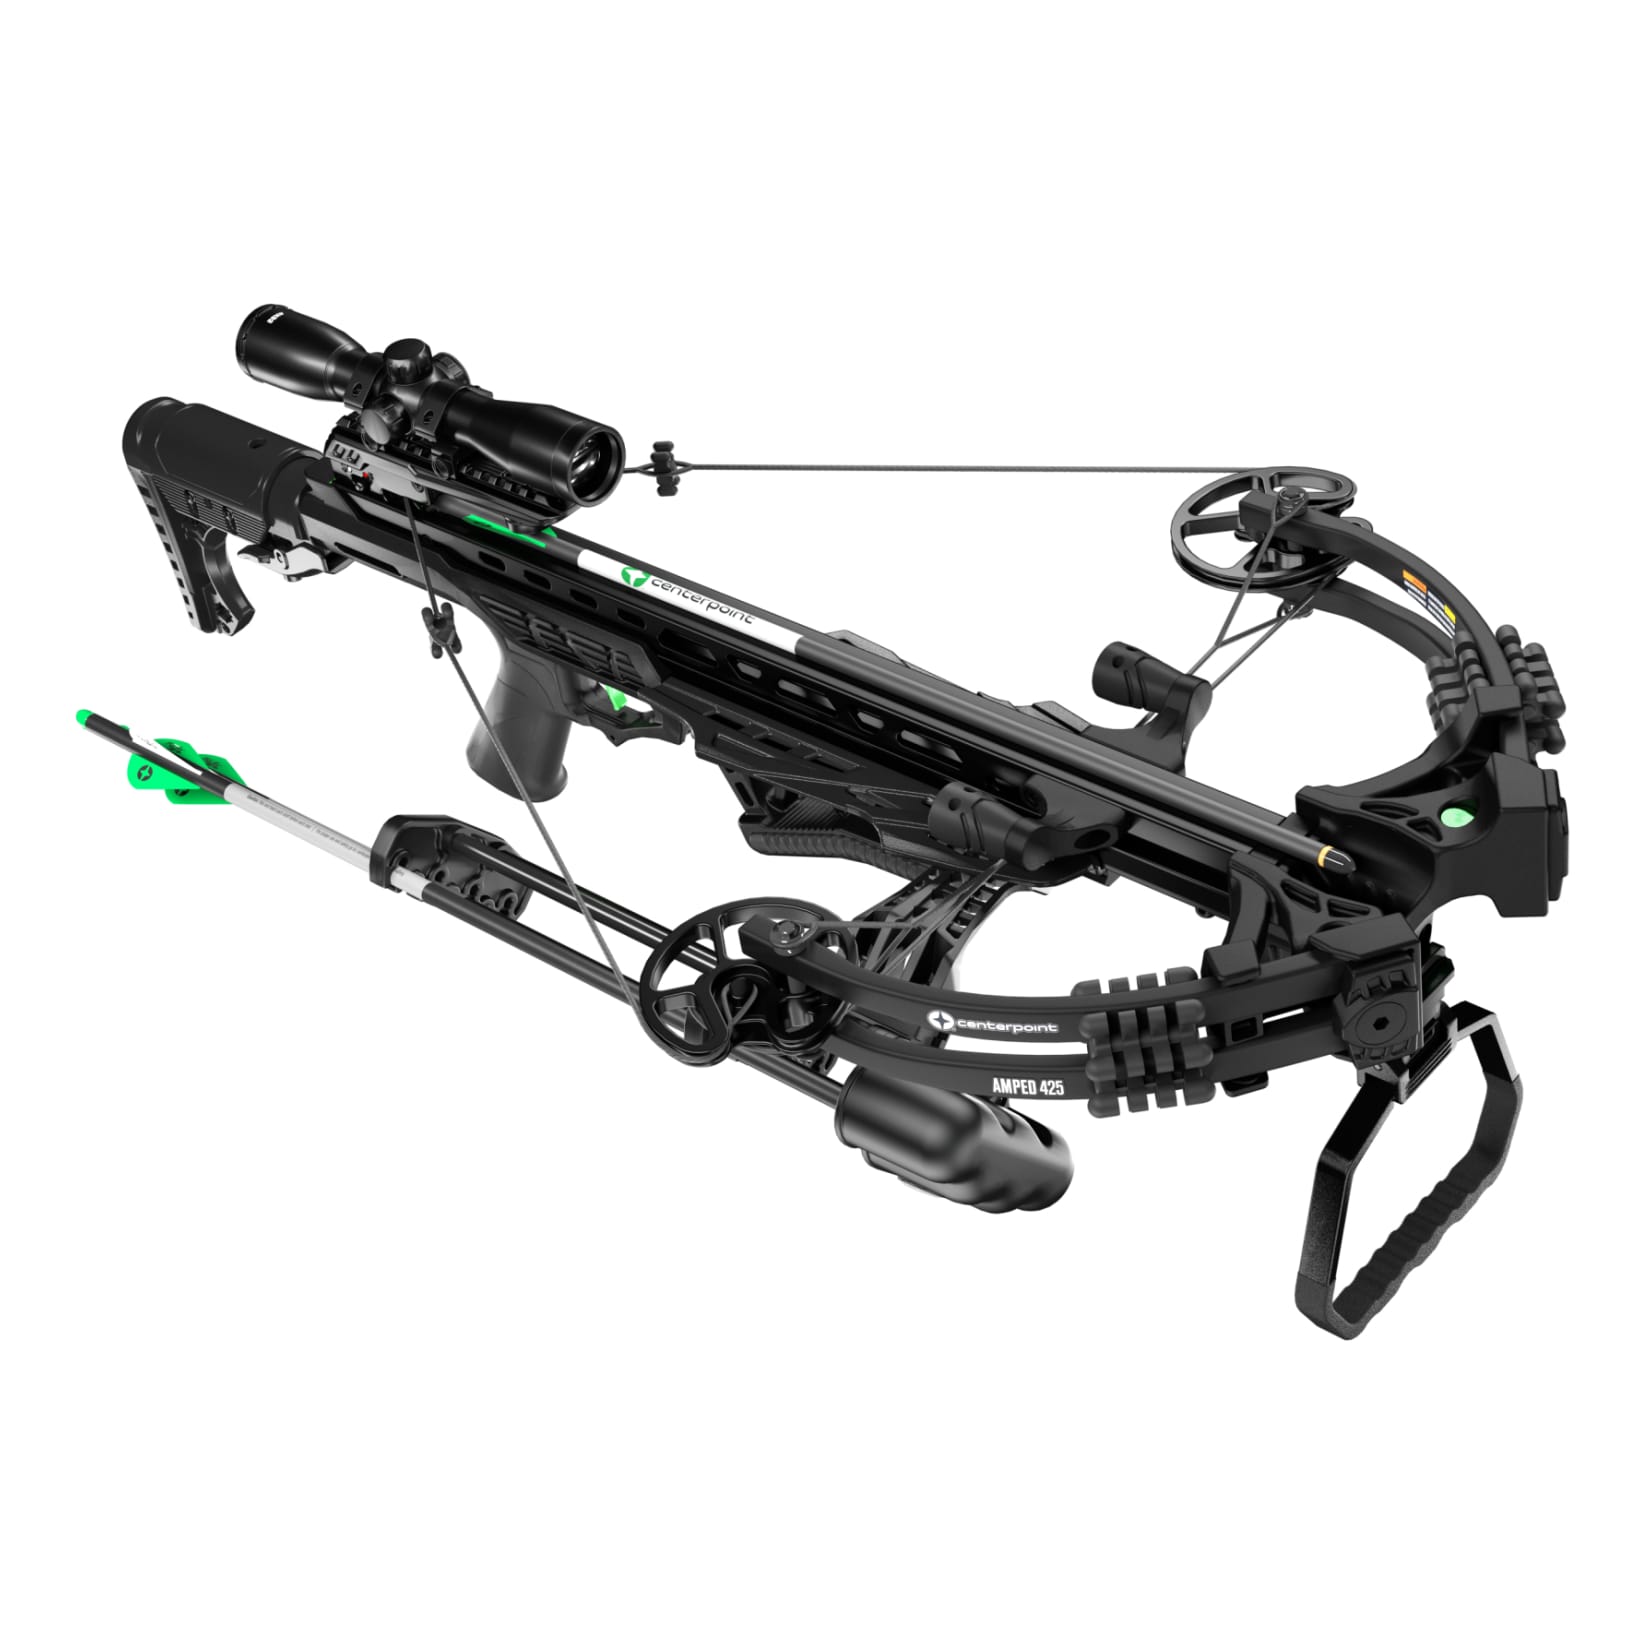 CenterPoint® Amped™ 425 Compound Crossbow With Silent Crank